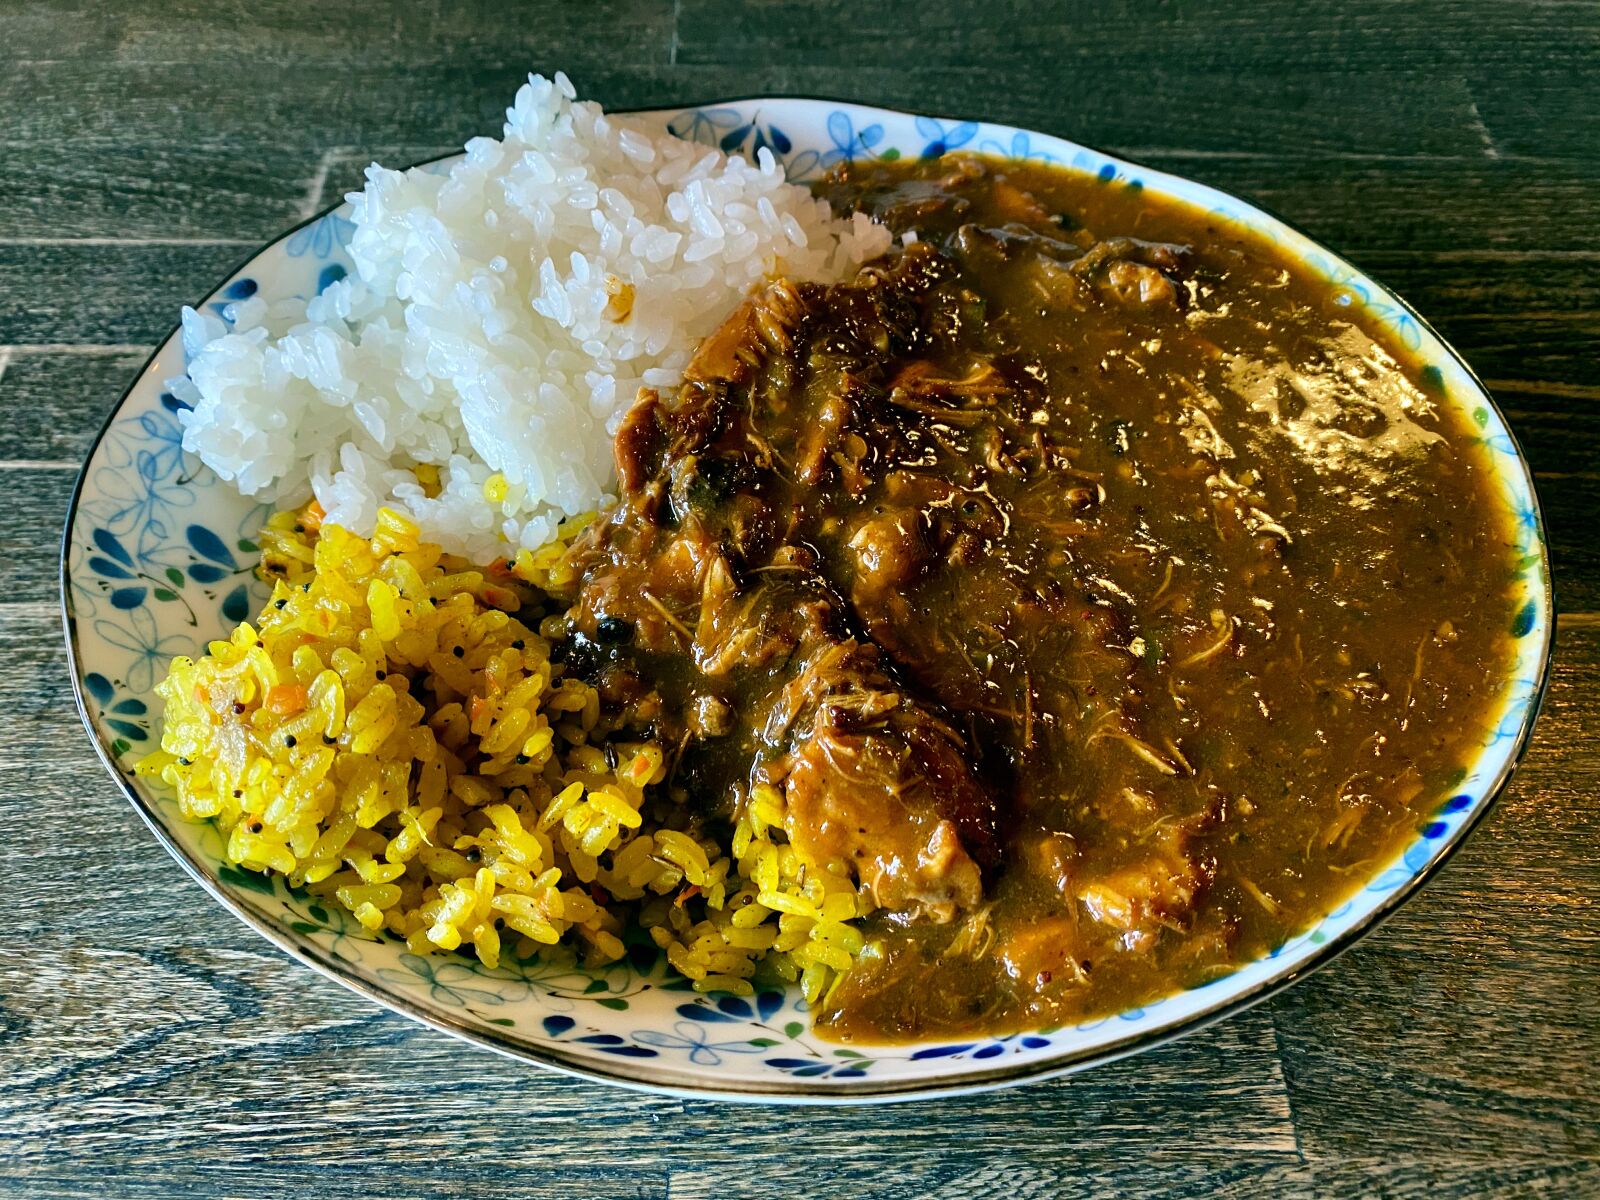 iPhone 11 Pro Max back triple camera 4.25mm f/1.8 sample photo. Curry, curry dishes, cuisine photography